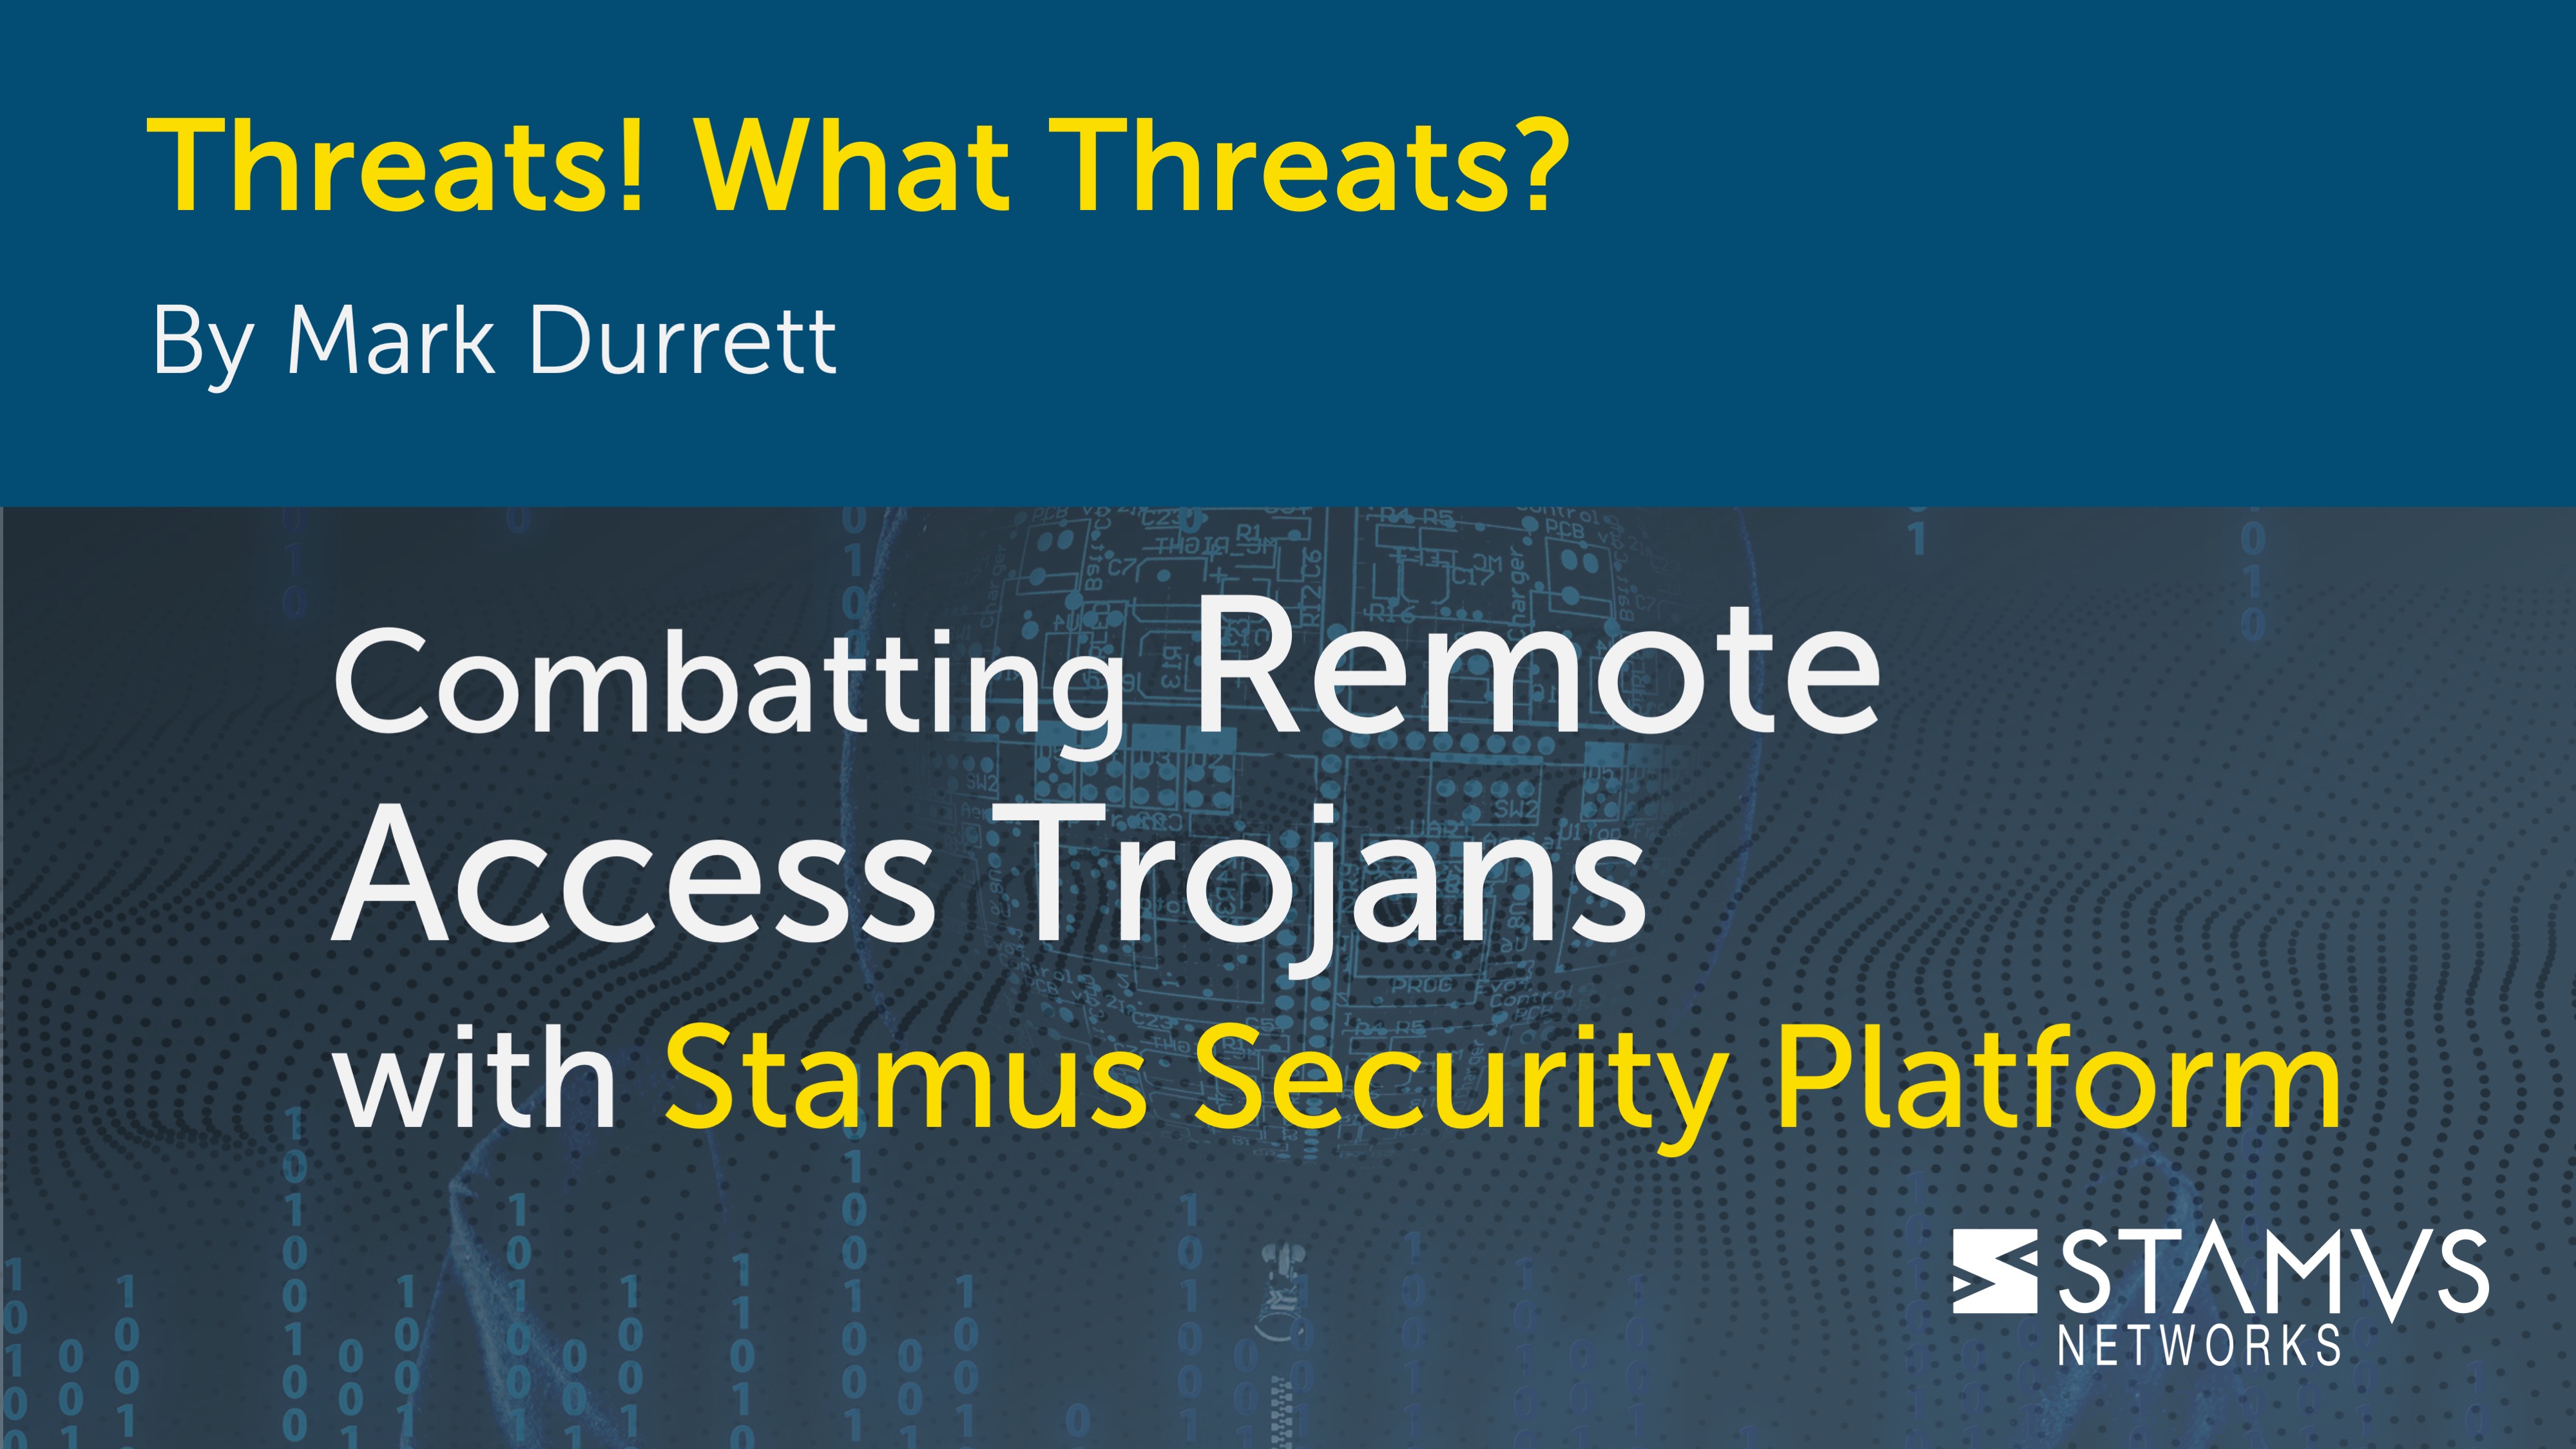 Threats! What Threats? Combatting Remote Access Trojans with Stamus Security Platform